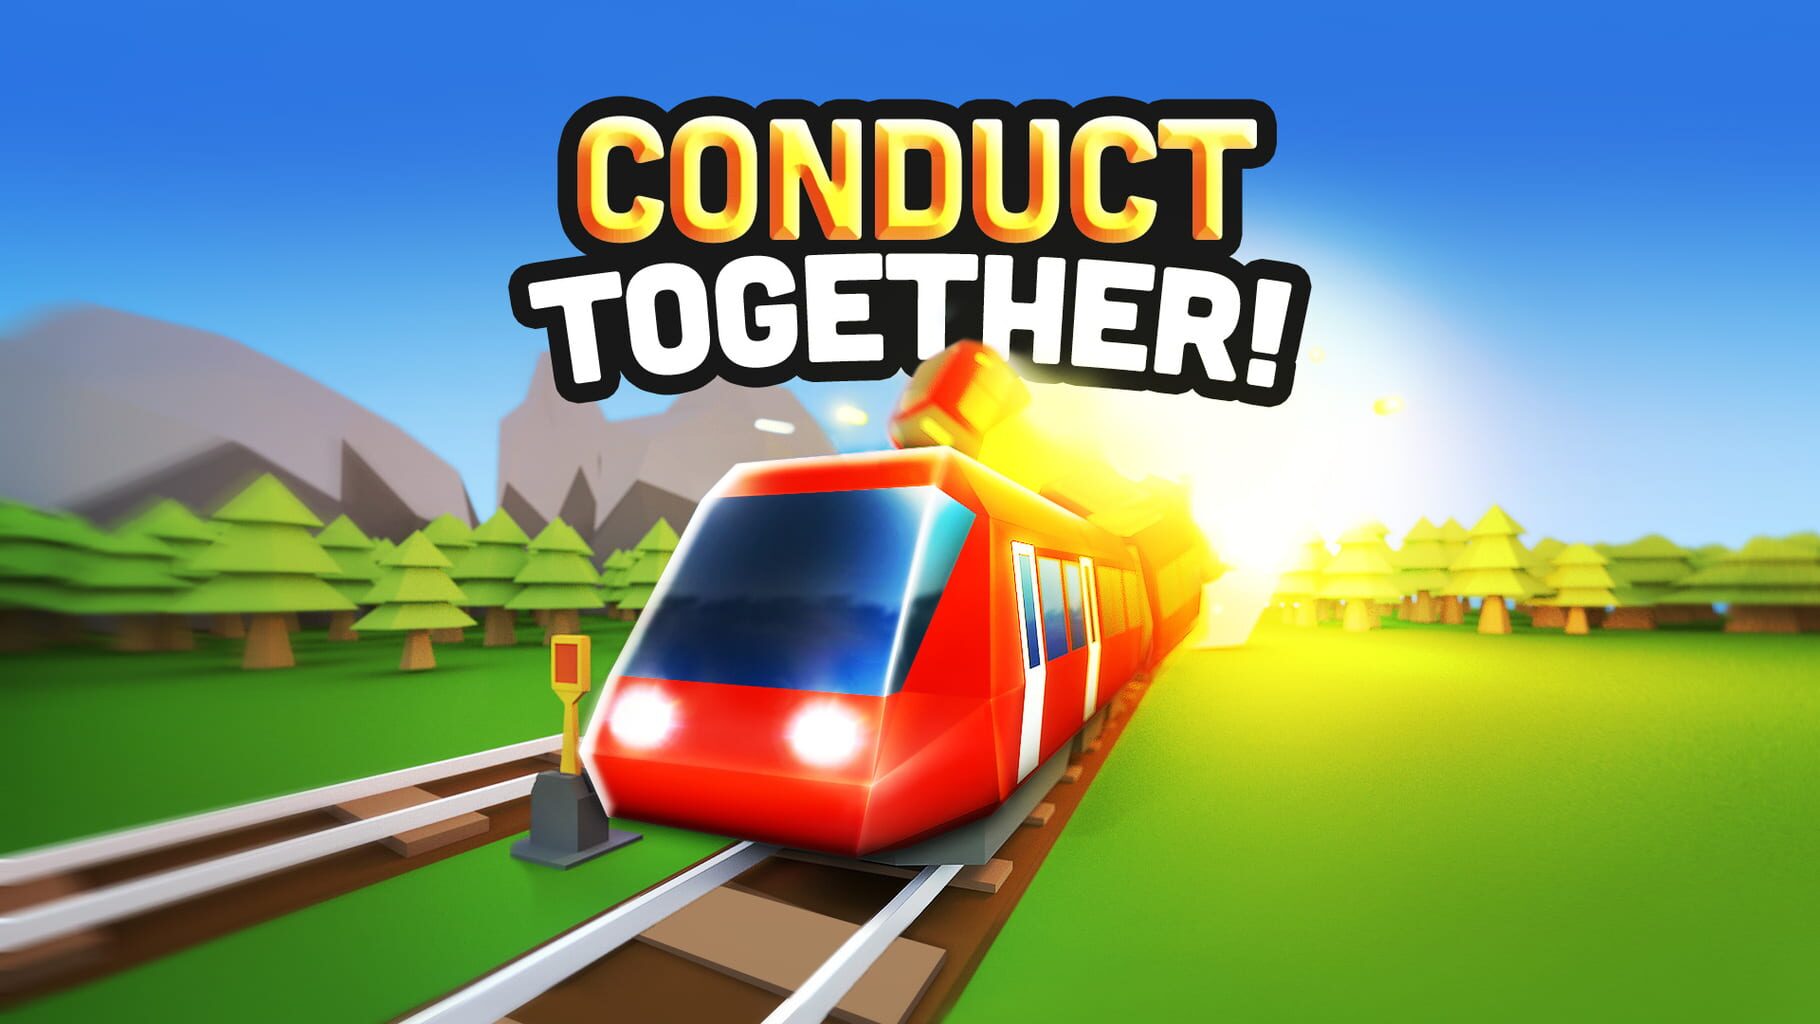 Conduct Together! artwork